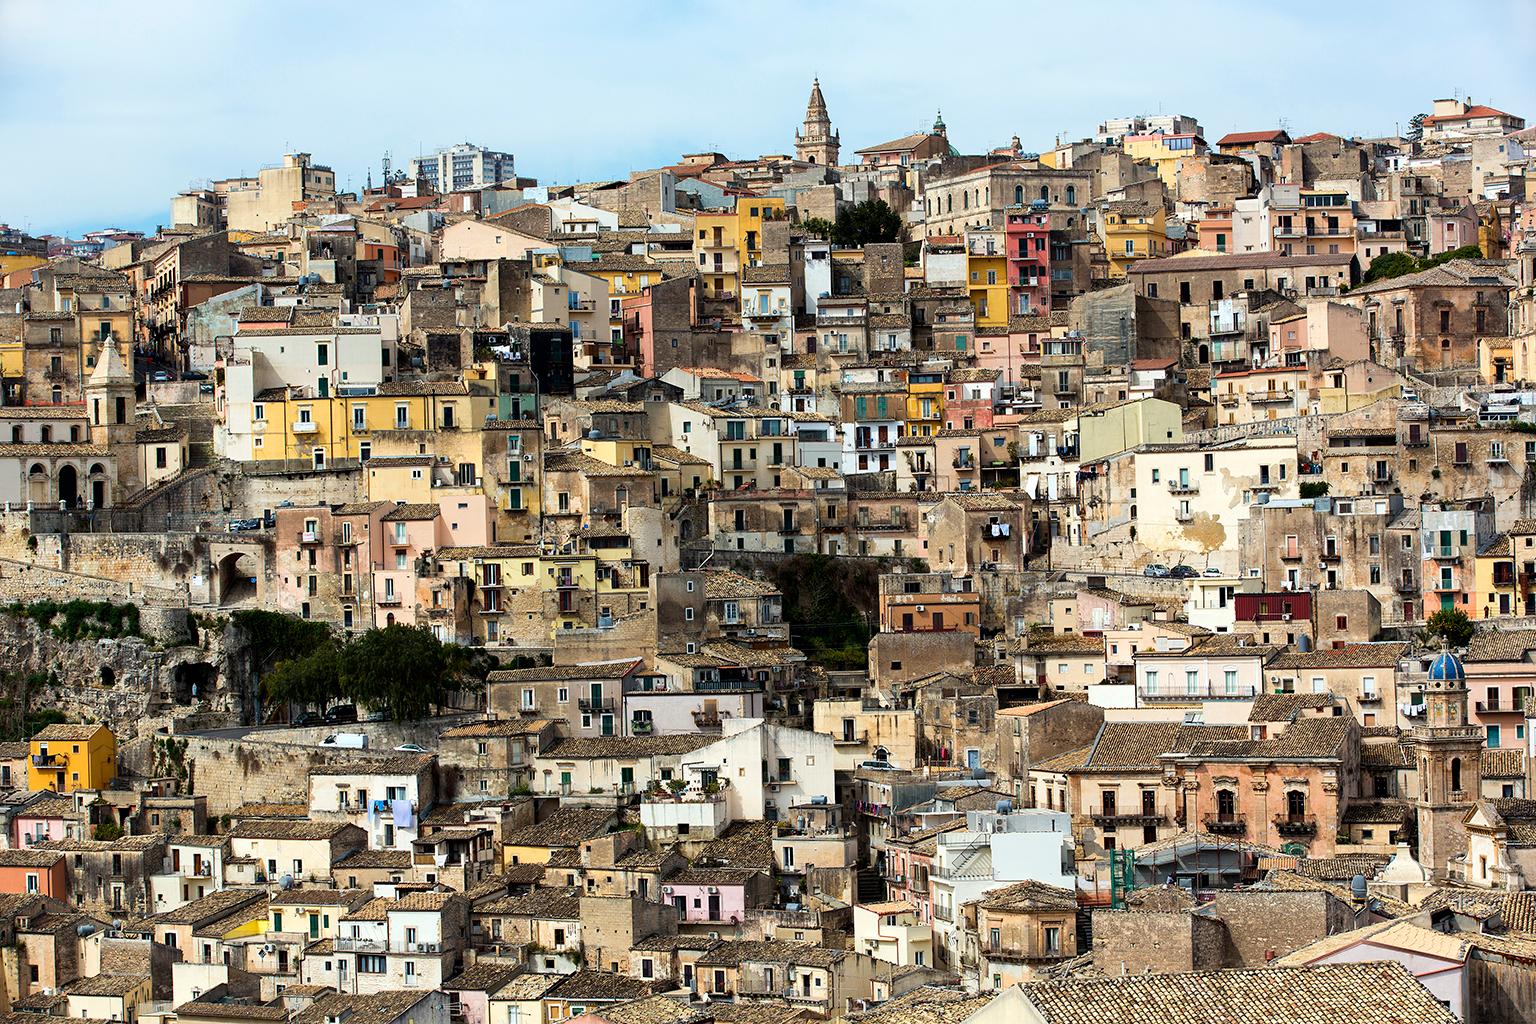  Cosmo Condina Landscape Photograph - Italy, Sicily, View of the town of Ragusa, 2017